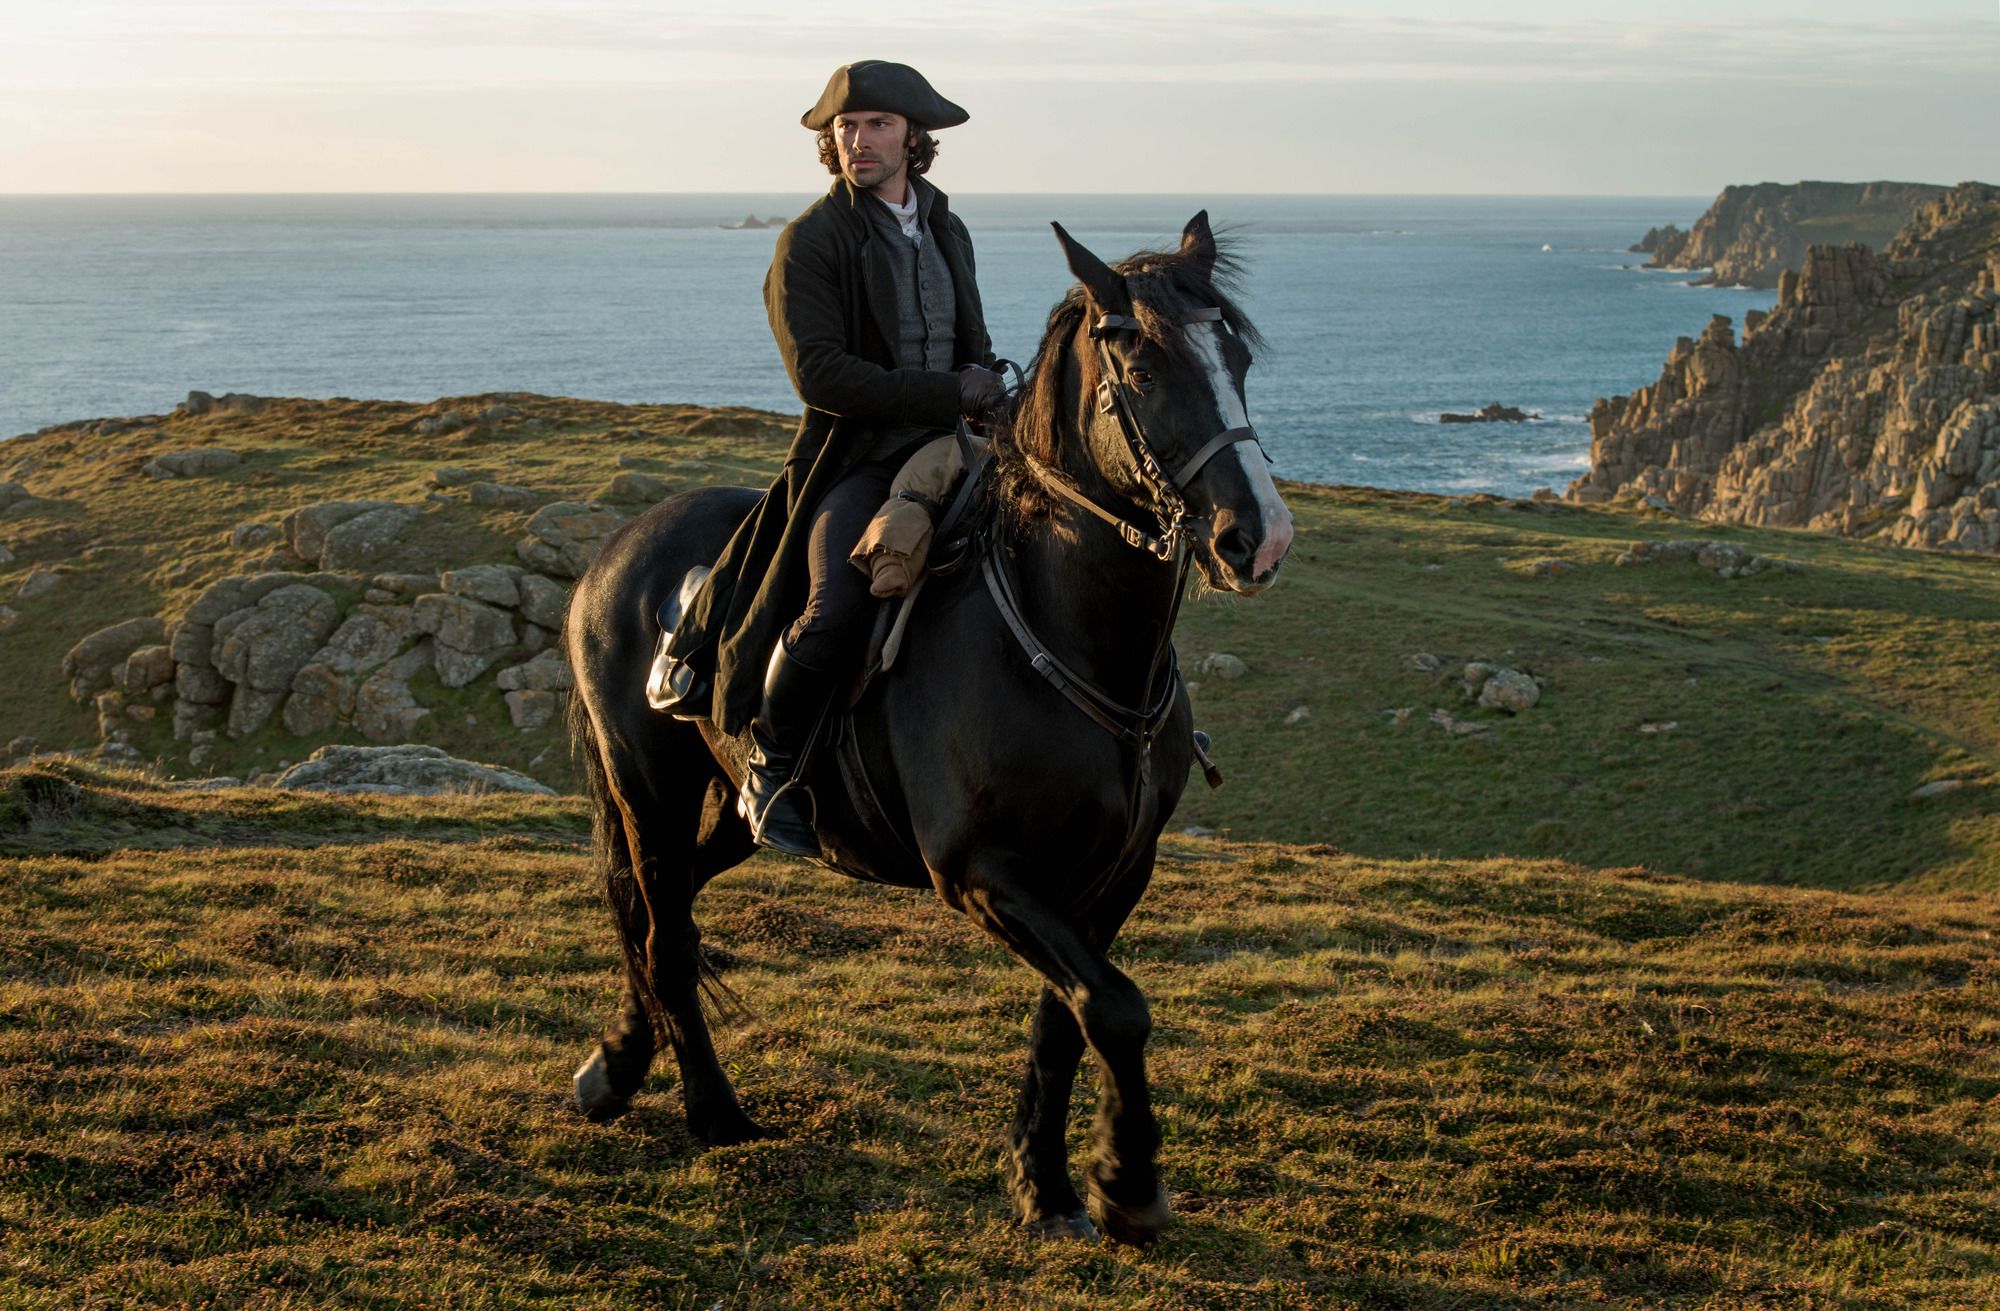 Aiden Turner, who plays Poldark, took a memento from the set. Image: BBC